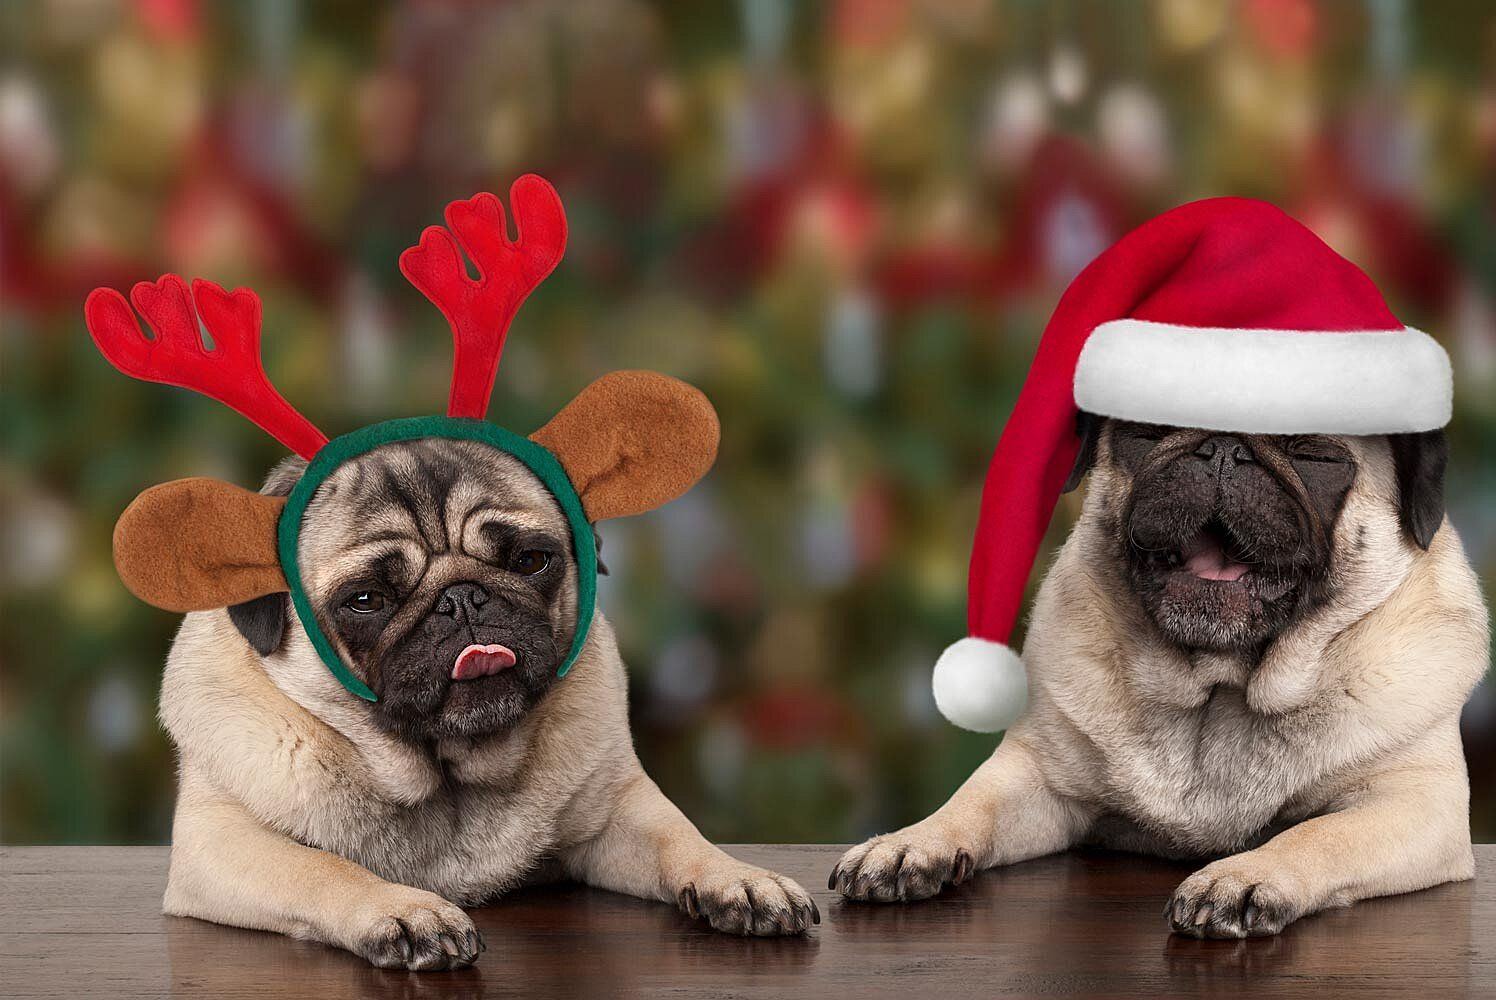 London's Pug Cafe Is Hosting a Christmas Party for Pomeranians, Pugs, and Sausage Dogs. Travel + Leisure